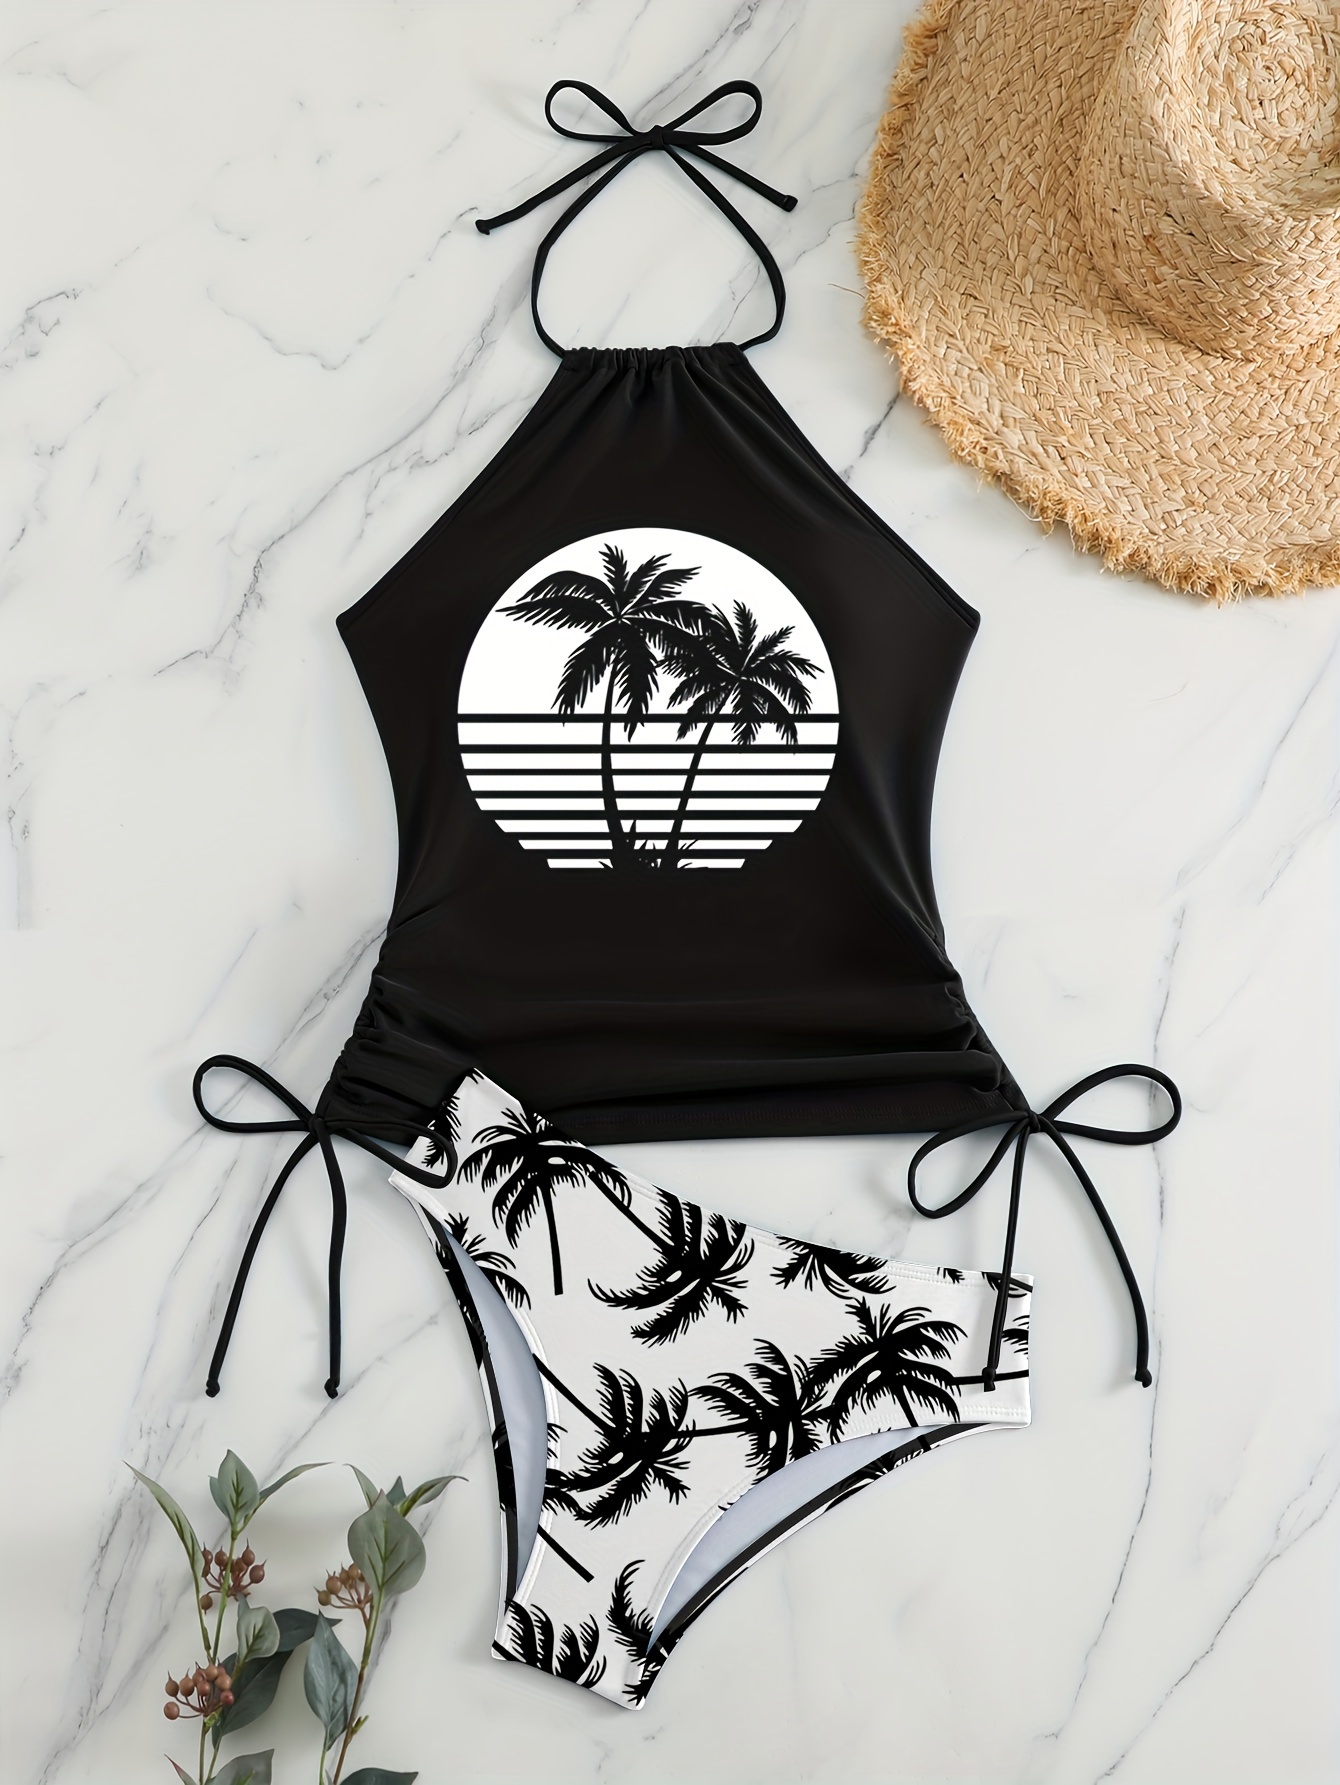 Dropship Coconut Tree Sunset Pattern Drawstring 2 Piece Set Swimsuit,  Halter Tie Neck Backless Stretchy Low Waist Bathing Suit For Beach Pool,  Women's Swimwear & Clothing to Sell Online at a Lower